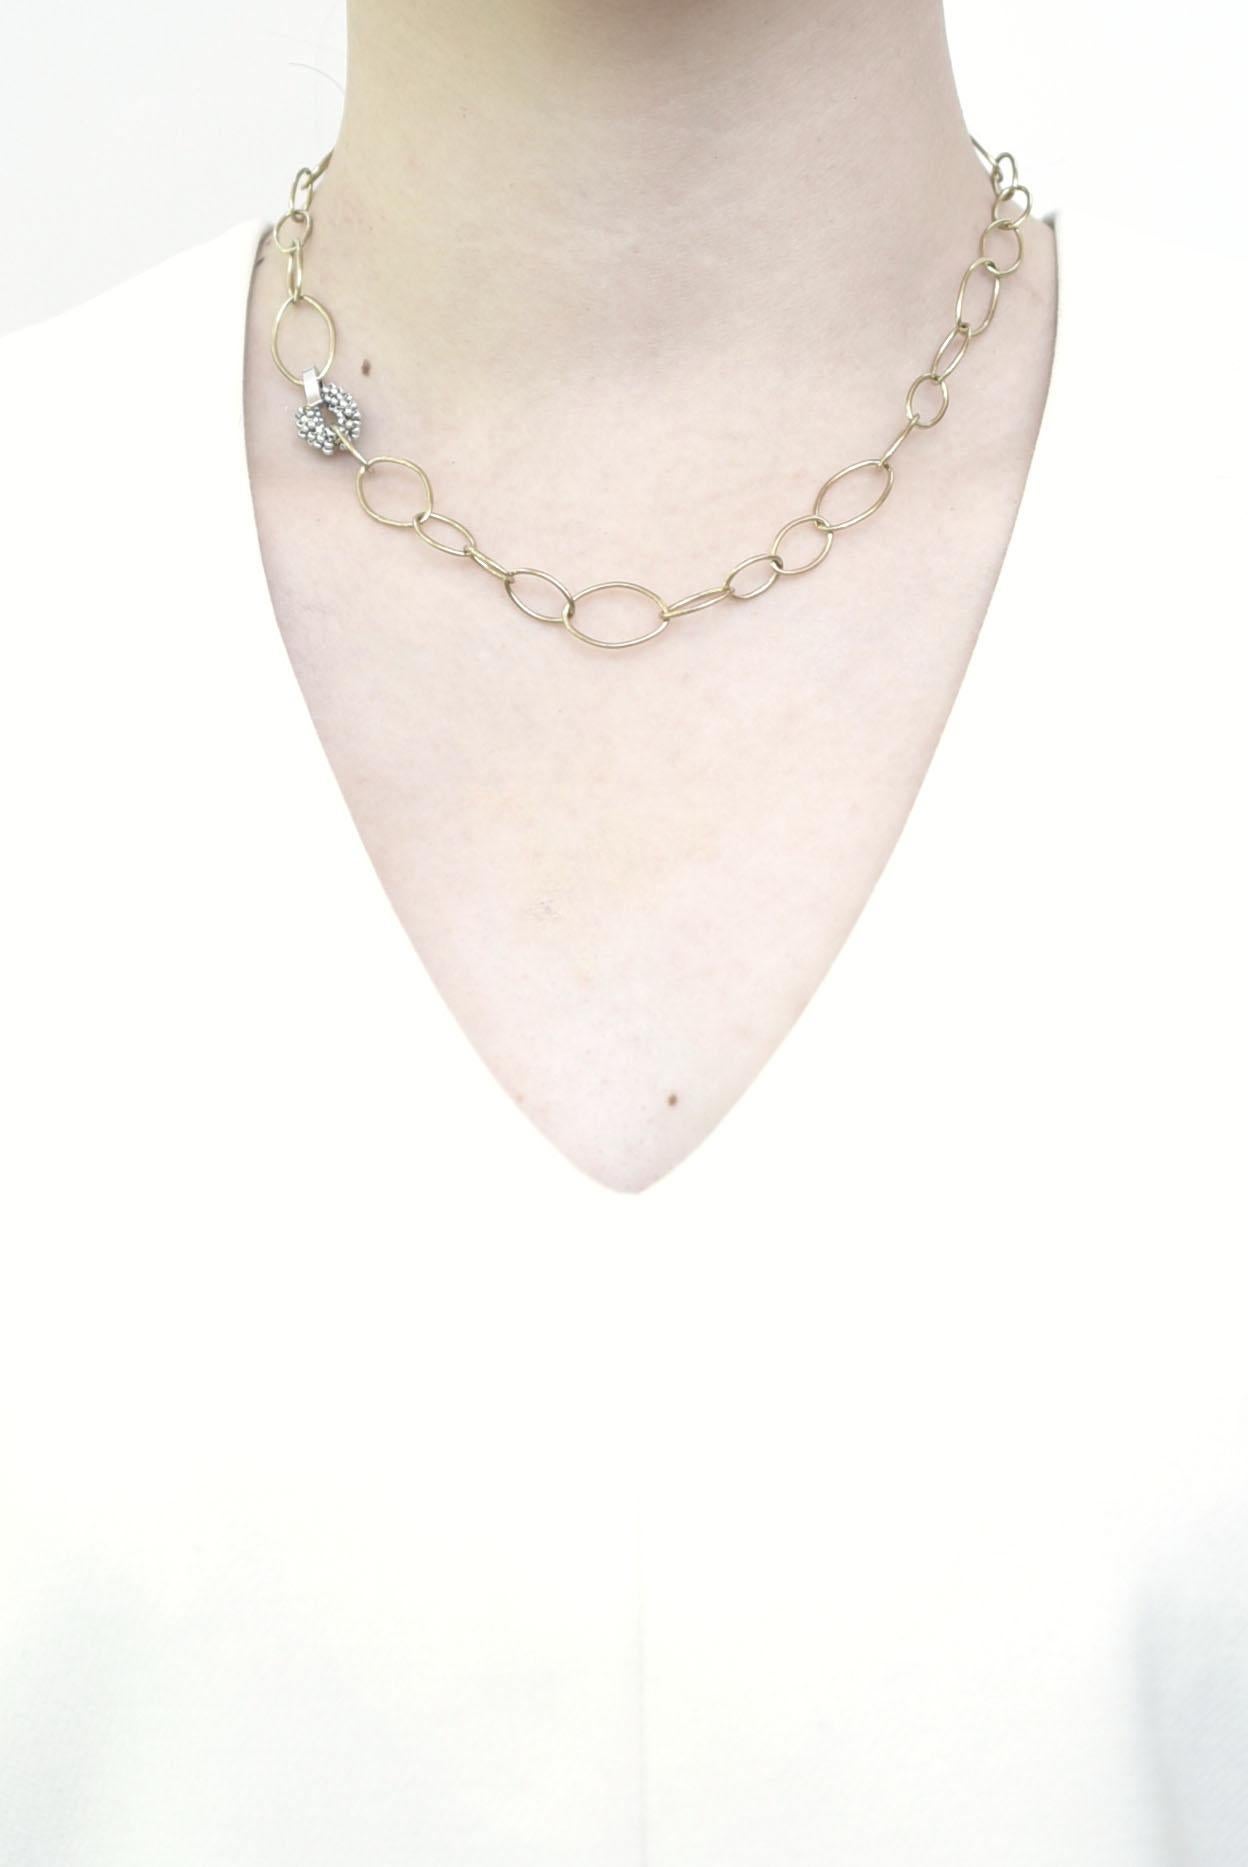 material : Brass,Vintage glass beads
size : length 40.5cm/ weight 8g

Necklace on a chain of ovals of different sizes.
The clasp is playful, as one loop of the clasp is tightly wound with vintage glass beads.
The delicate chain makes it the perfect